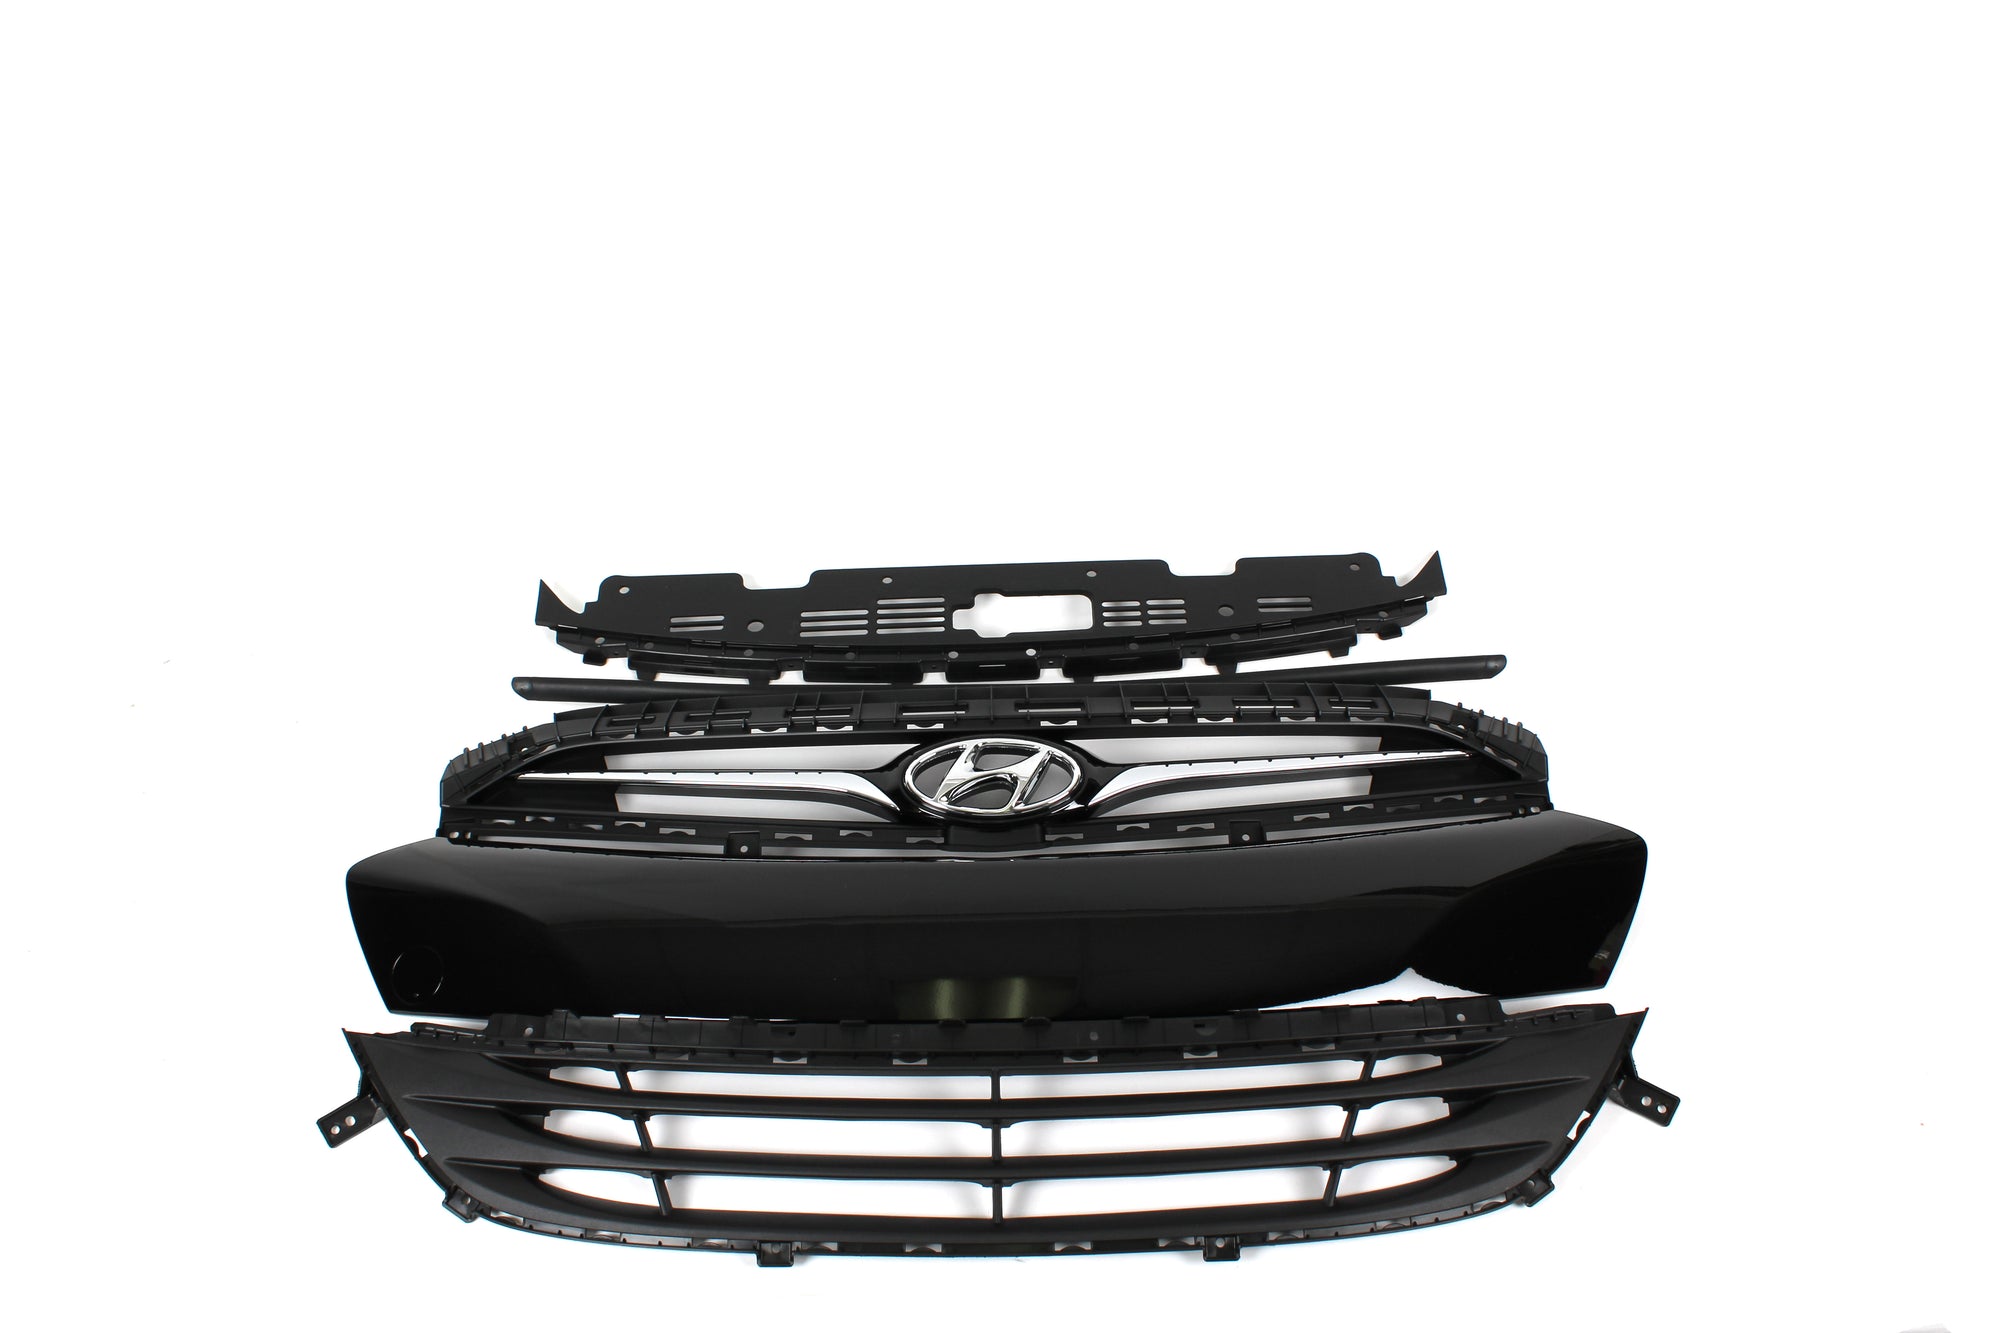 GENUINE Front Grille Set 5 Parts for 13-16 Hyundai Genesis Coupe 863502M300